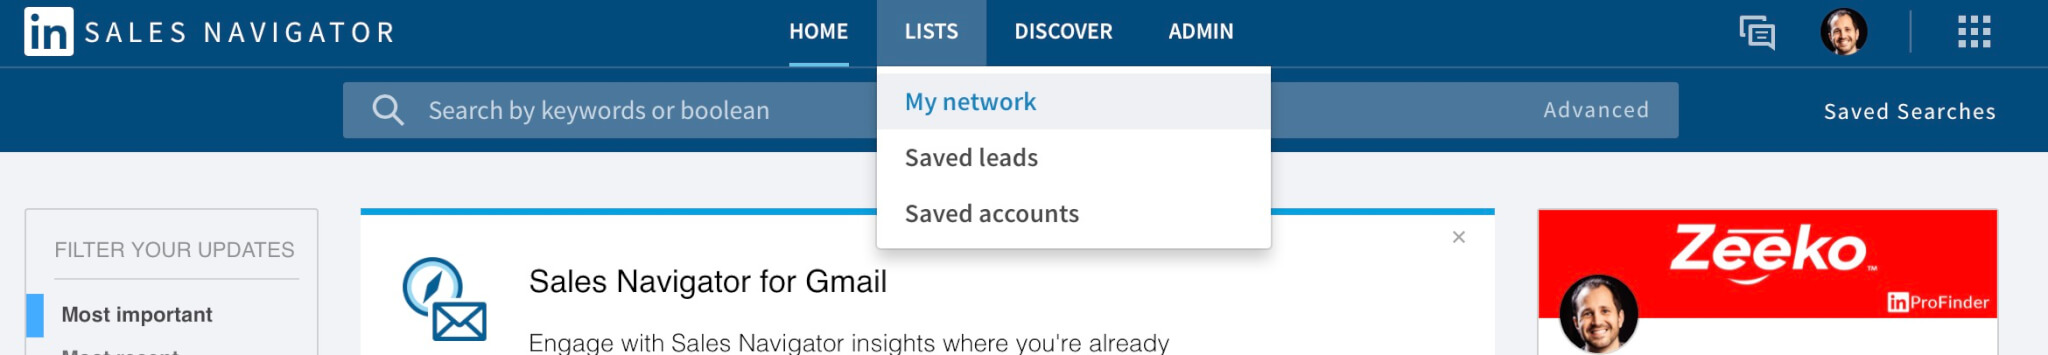 What does found you via My Network on Linkedin mean? Finding my network on sales navigator